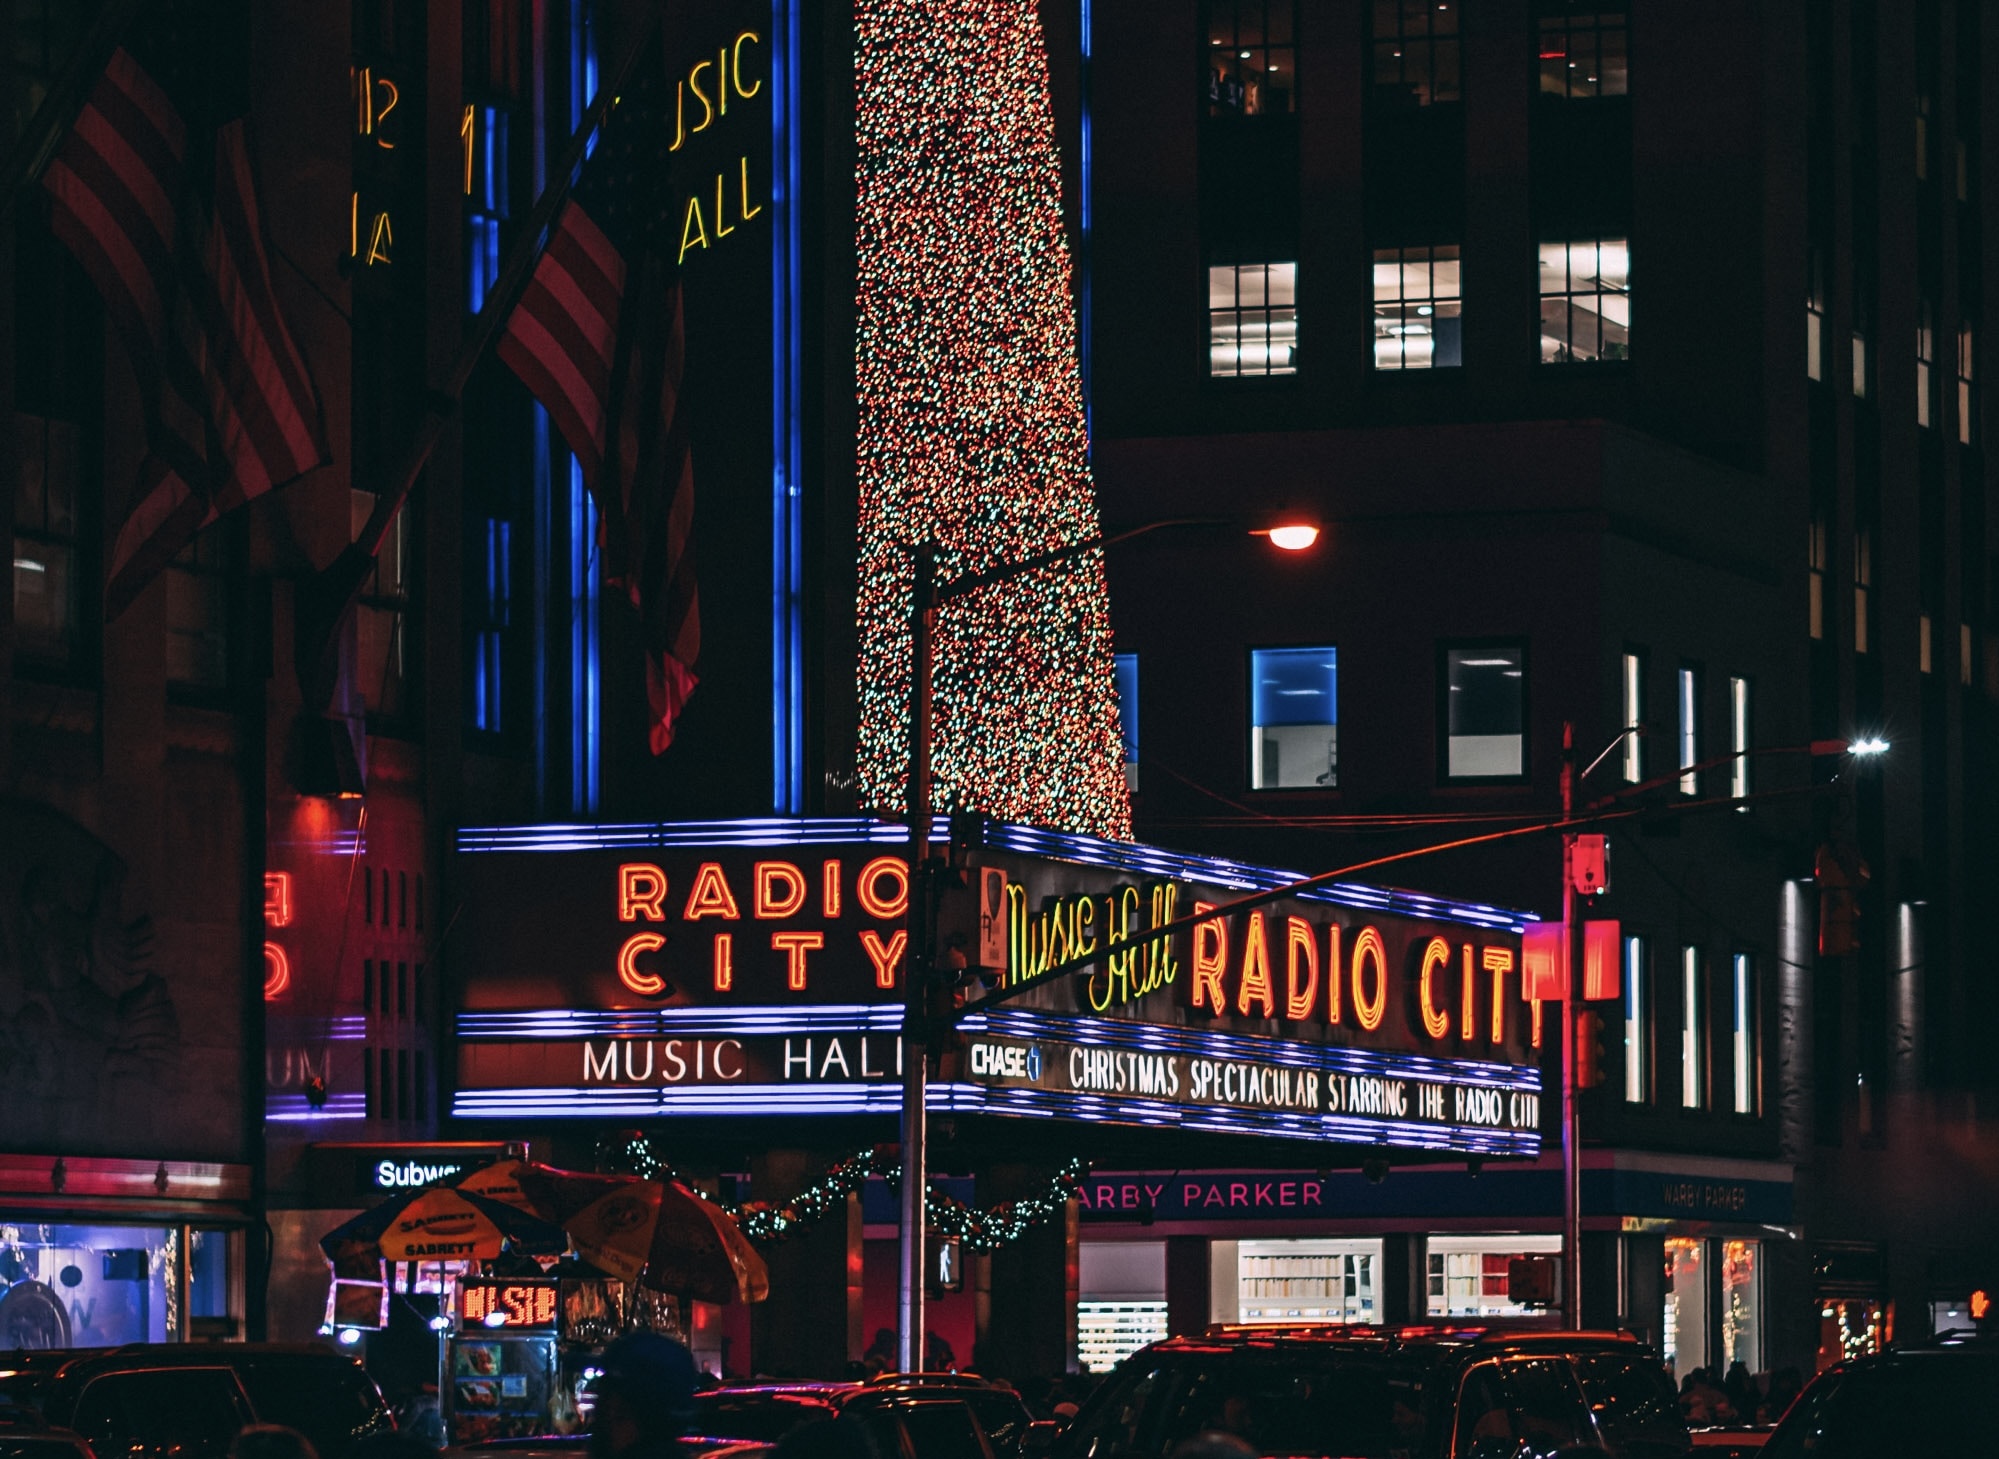 Radio City is a historic attraction which hosts the annual Christmas Spectacular. 
Pictured: the Radio City Music Hall and Christmas Special advertisements at night with Christmas lights shining 